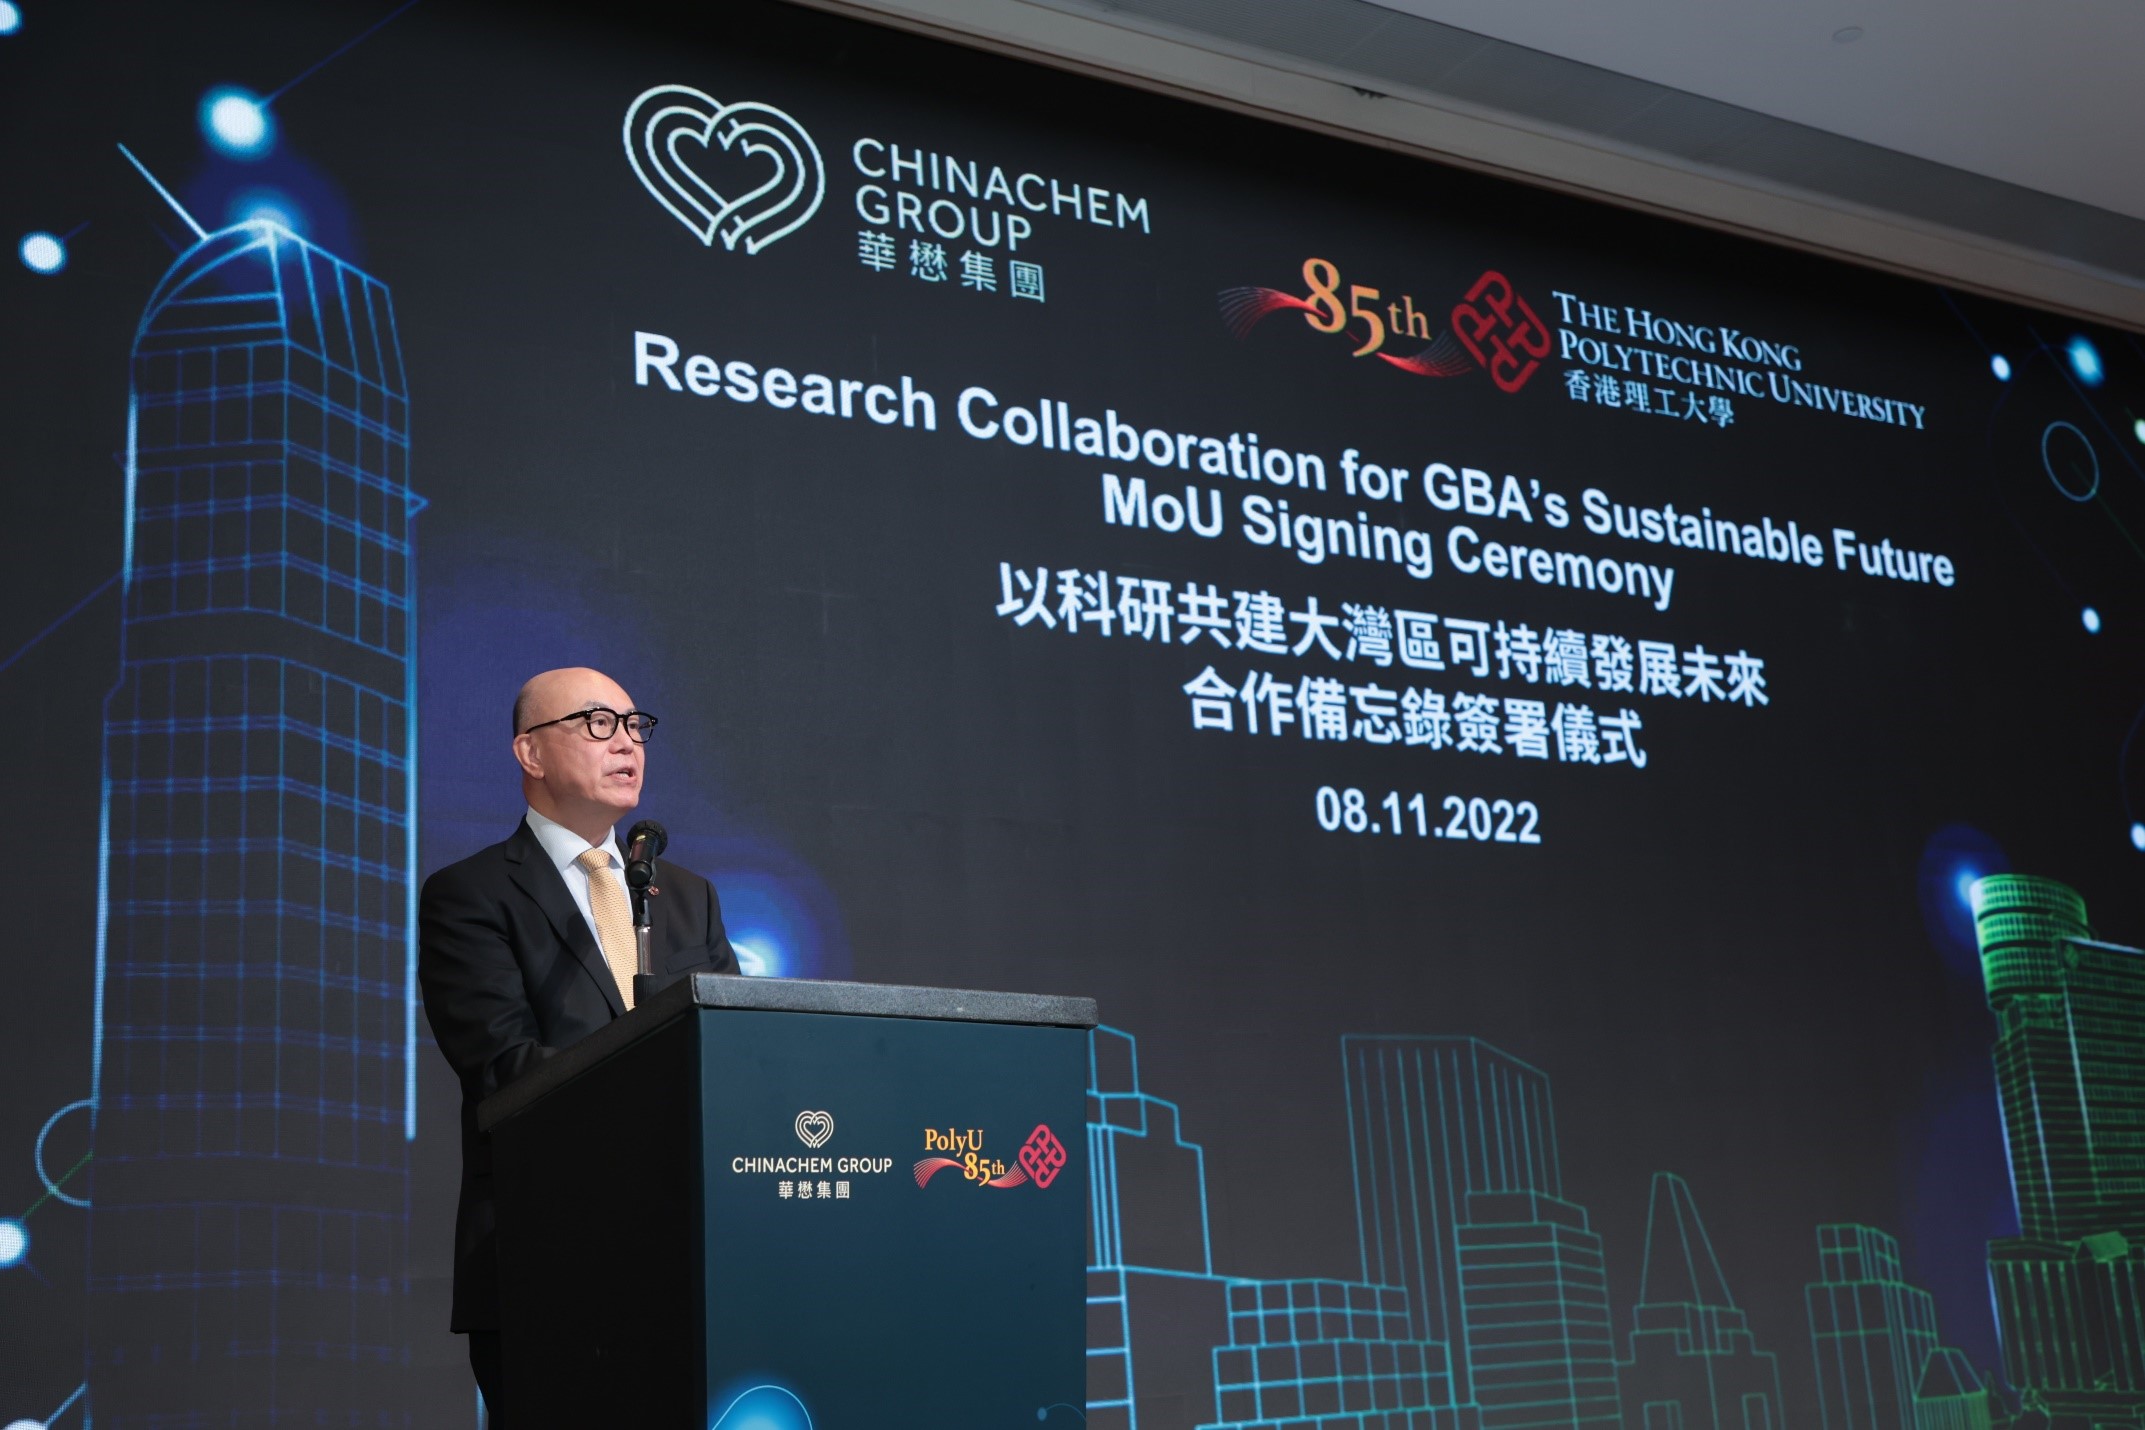 Donald Choi said the collaboration is a very valuable step forward in regard to fostering business collaboration with academia and research organisations in order to pioneer innovative technological solutions.